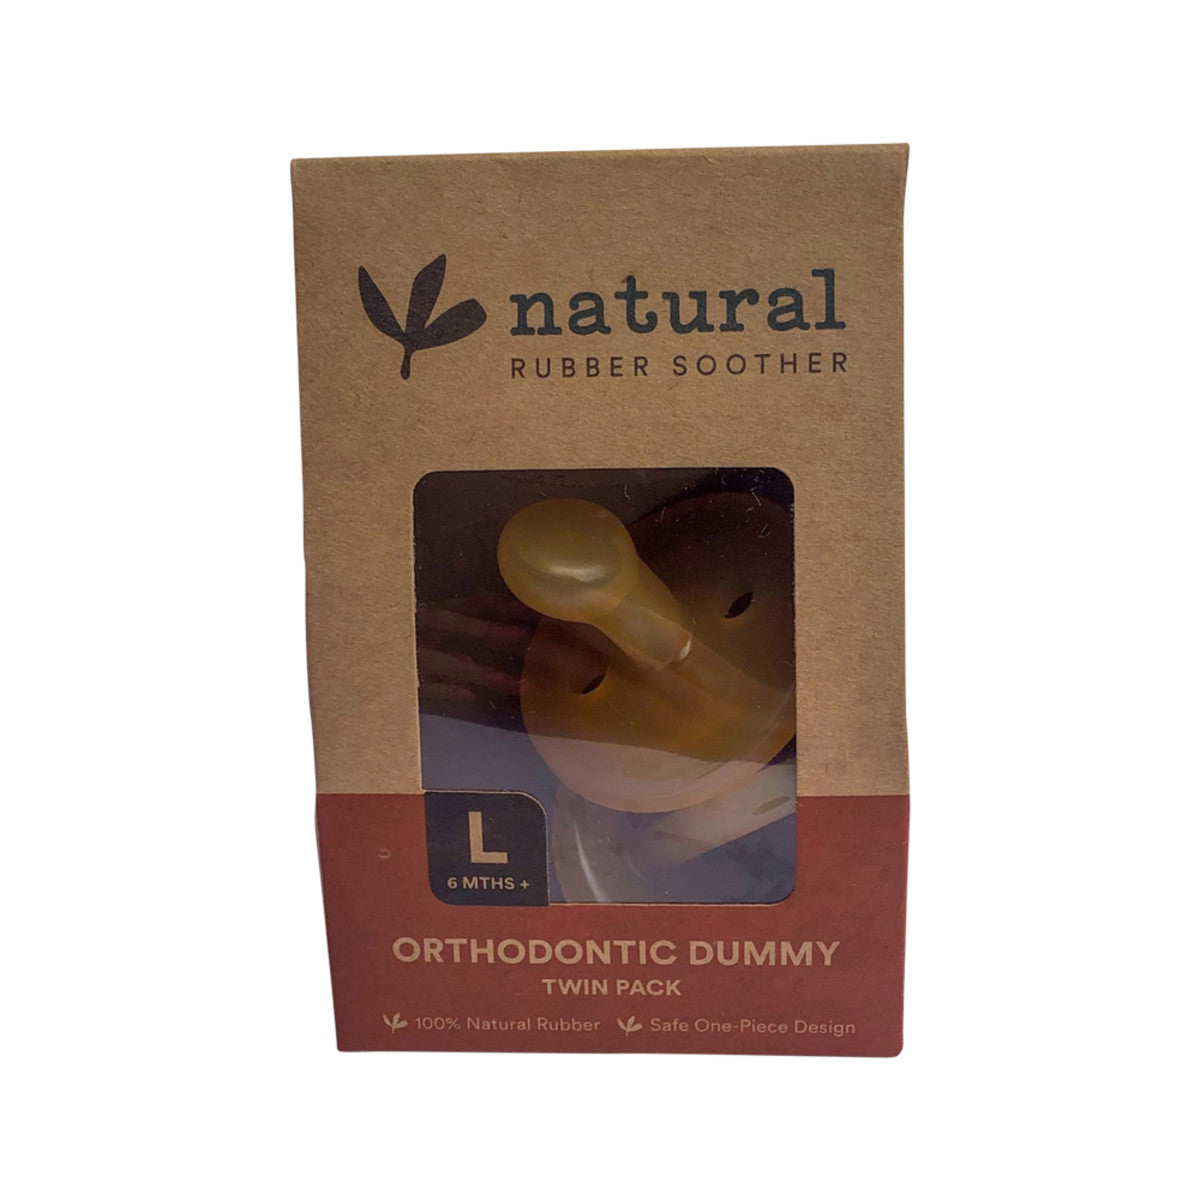 Natural Rubber Soother Orthodontic Dummy Large (6+ Months) Twin Pack